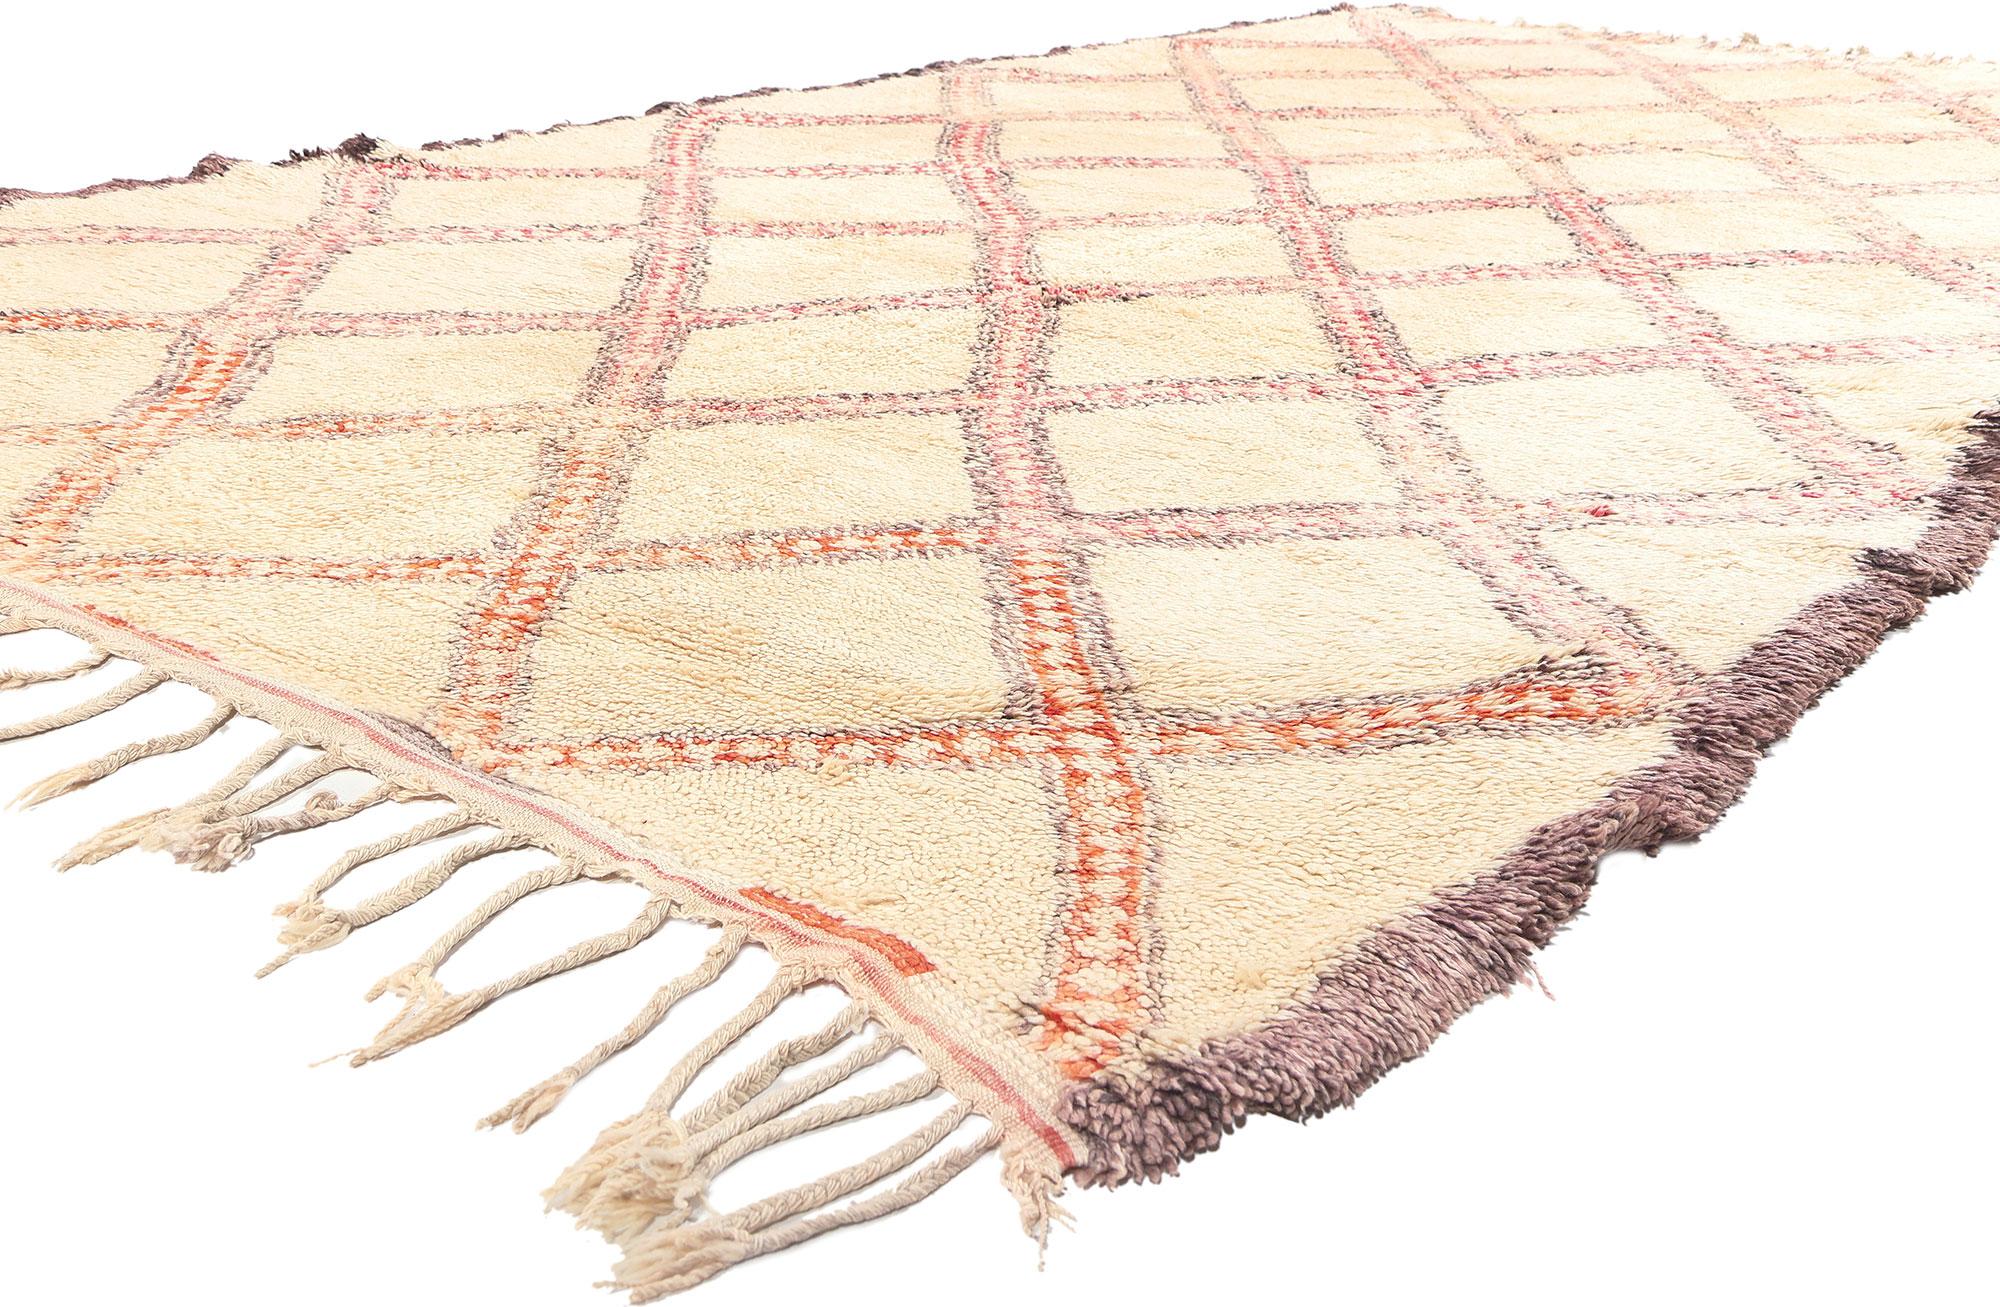 74537 Vintage Beni Ourain Moroccan Rug, 06'08 x 12'07. 
In the heart of the North-Eastern Middle Atlas Mountains of Morocco, skilled hands meticulously weave the captivating tales of Beni Ourain rugs. Crafted by the adept women of the Beni Ourain